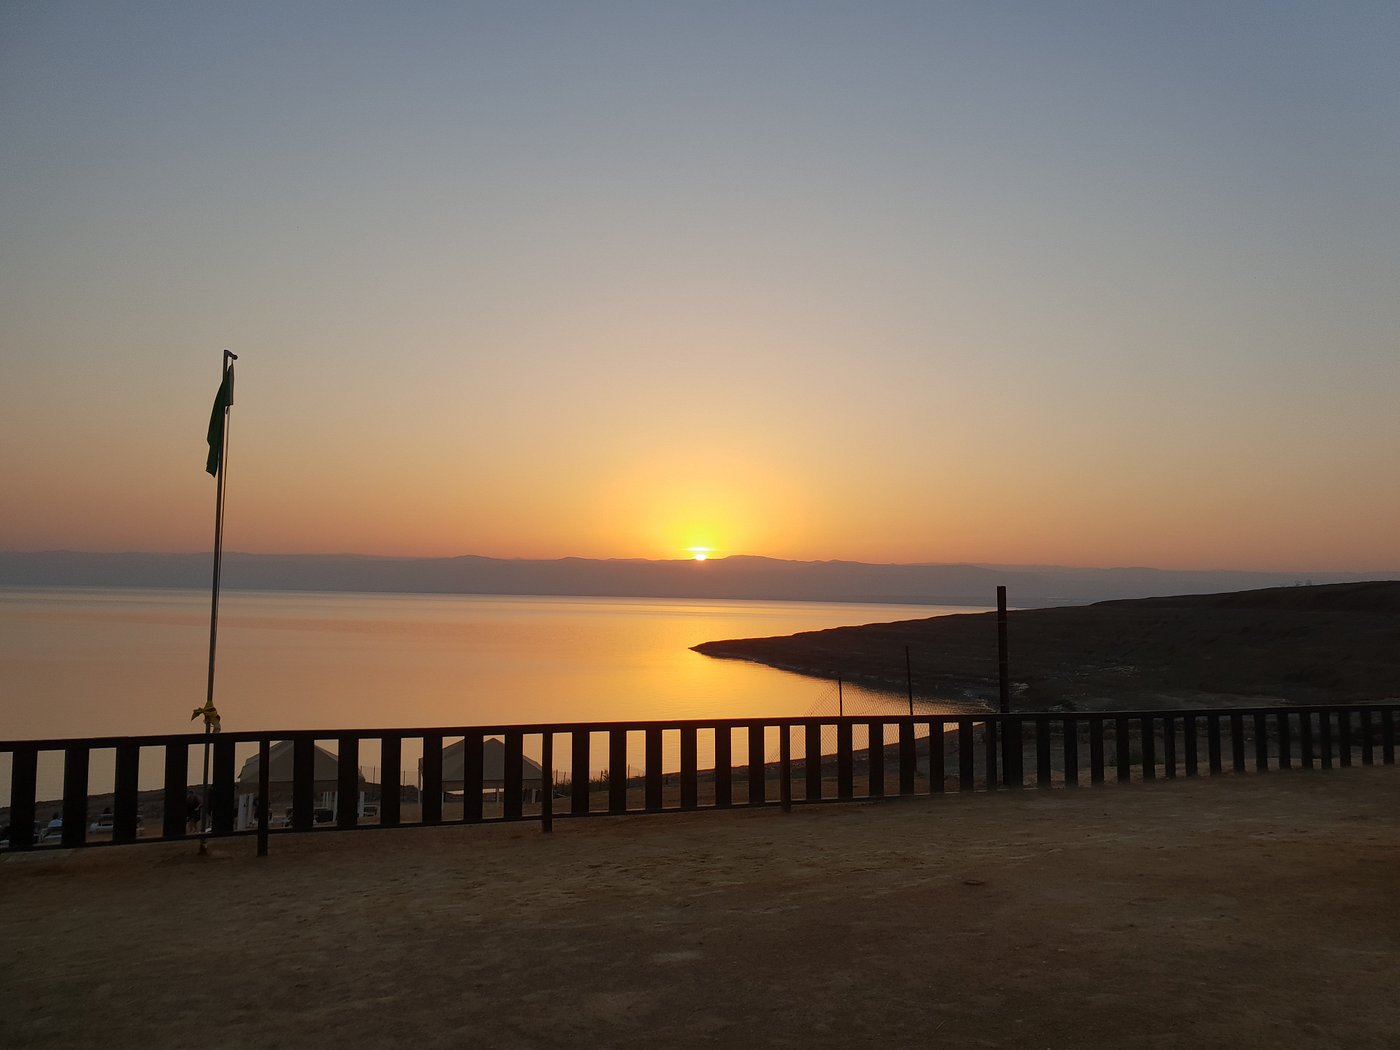 Day use with Lunch at Dead Sea (5 stars resort) Private transportation